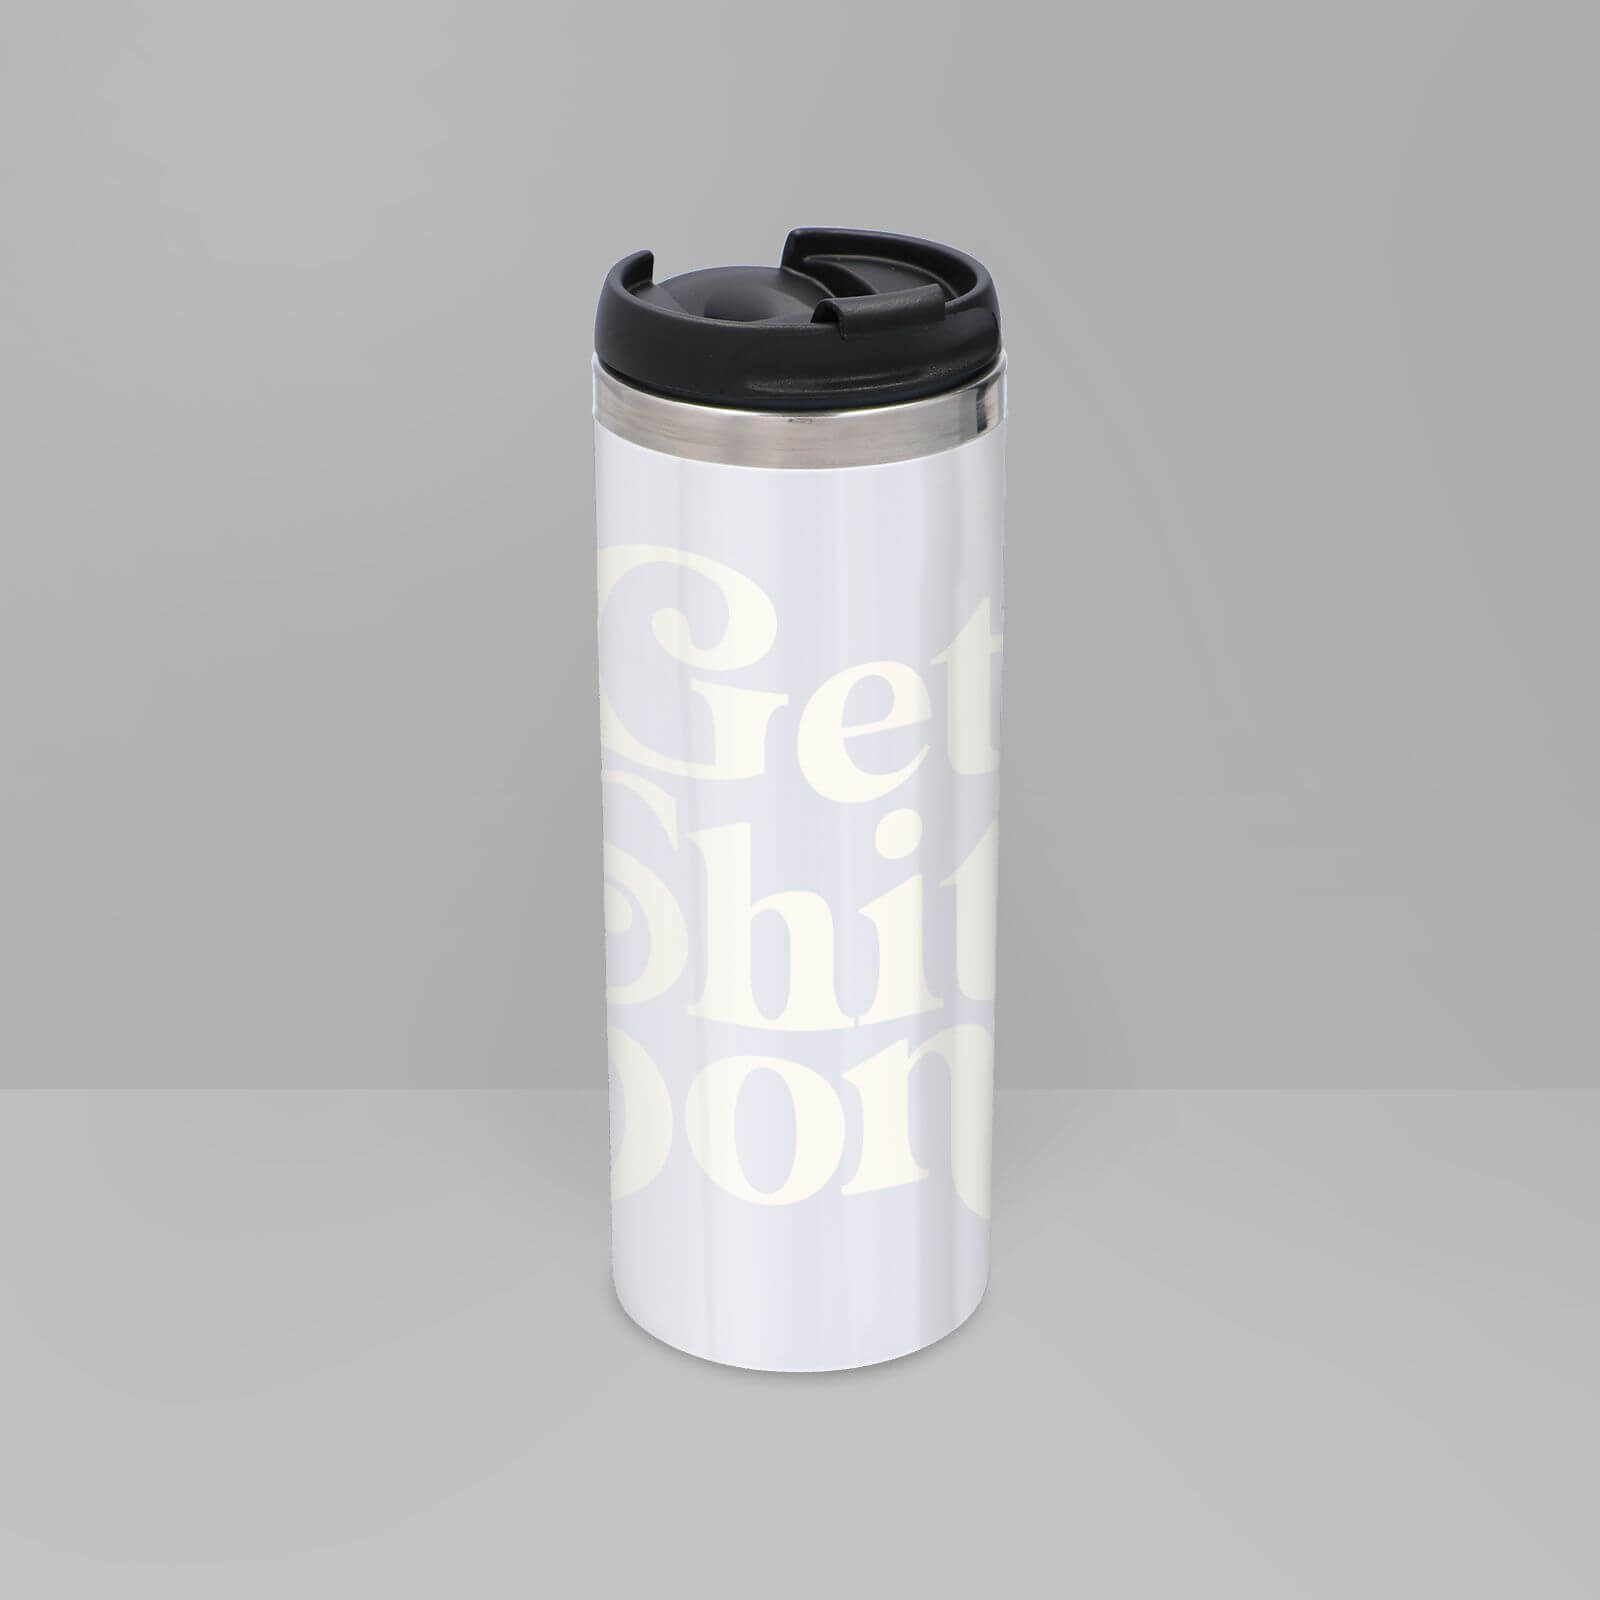 The Motivated Type Get Shit Done Thermo Travel Mug